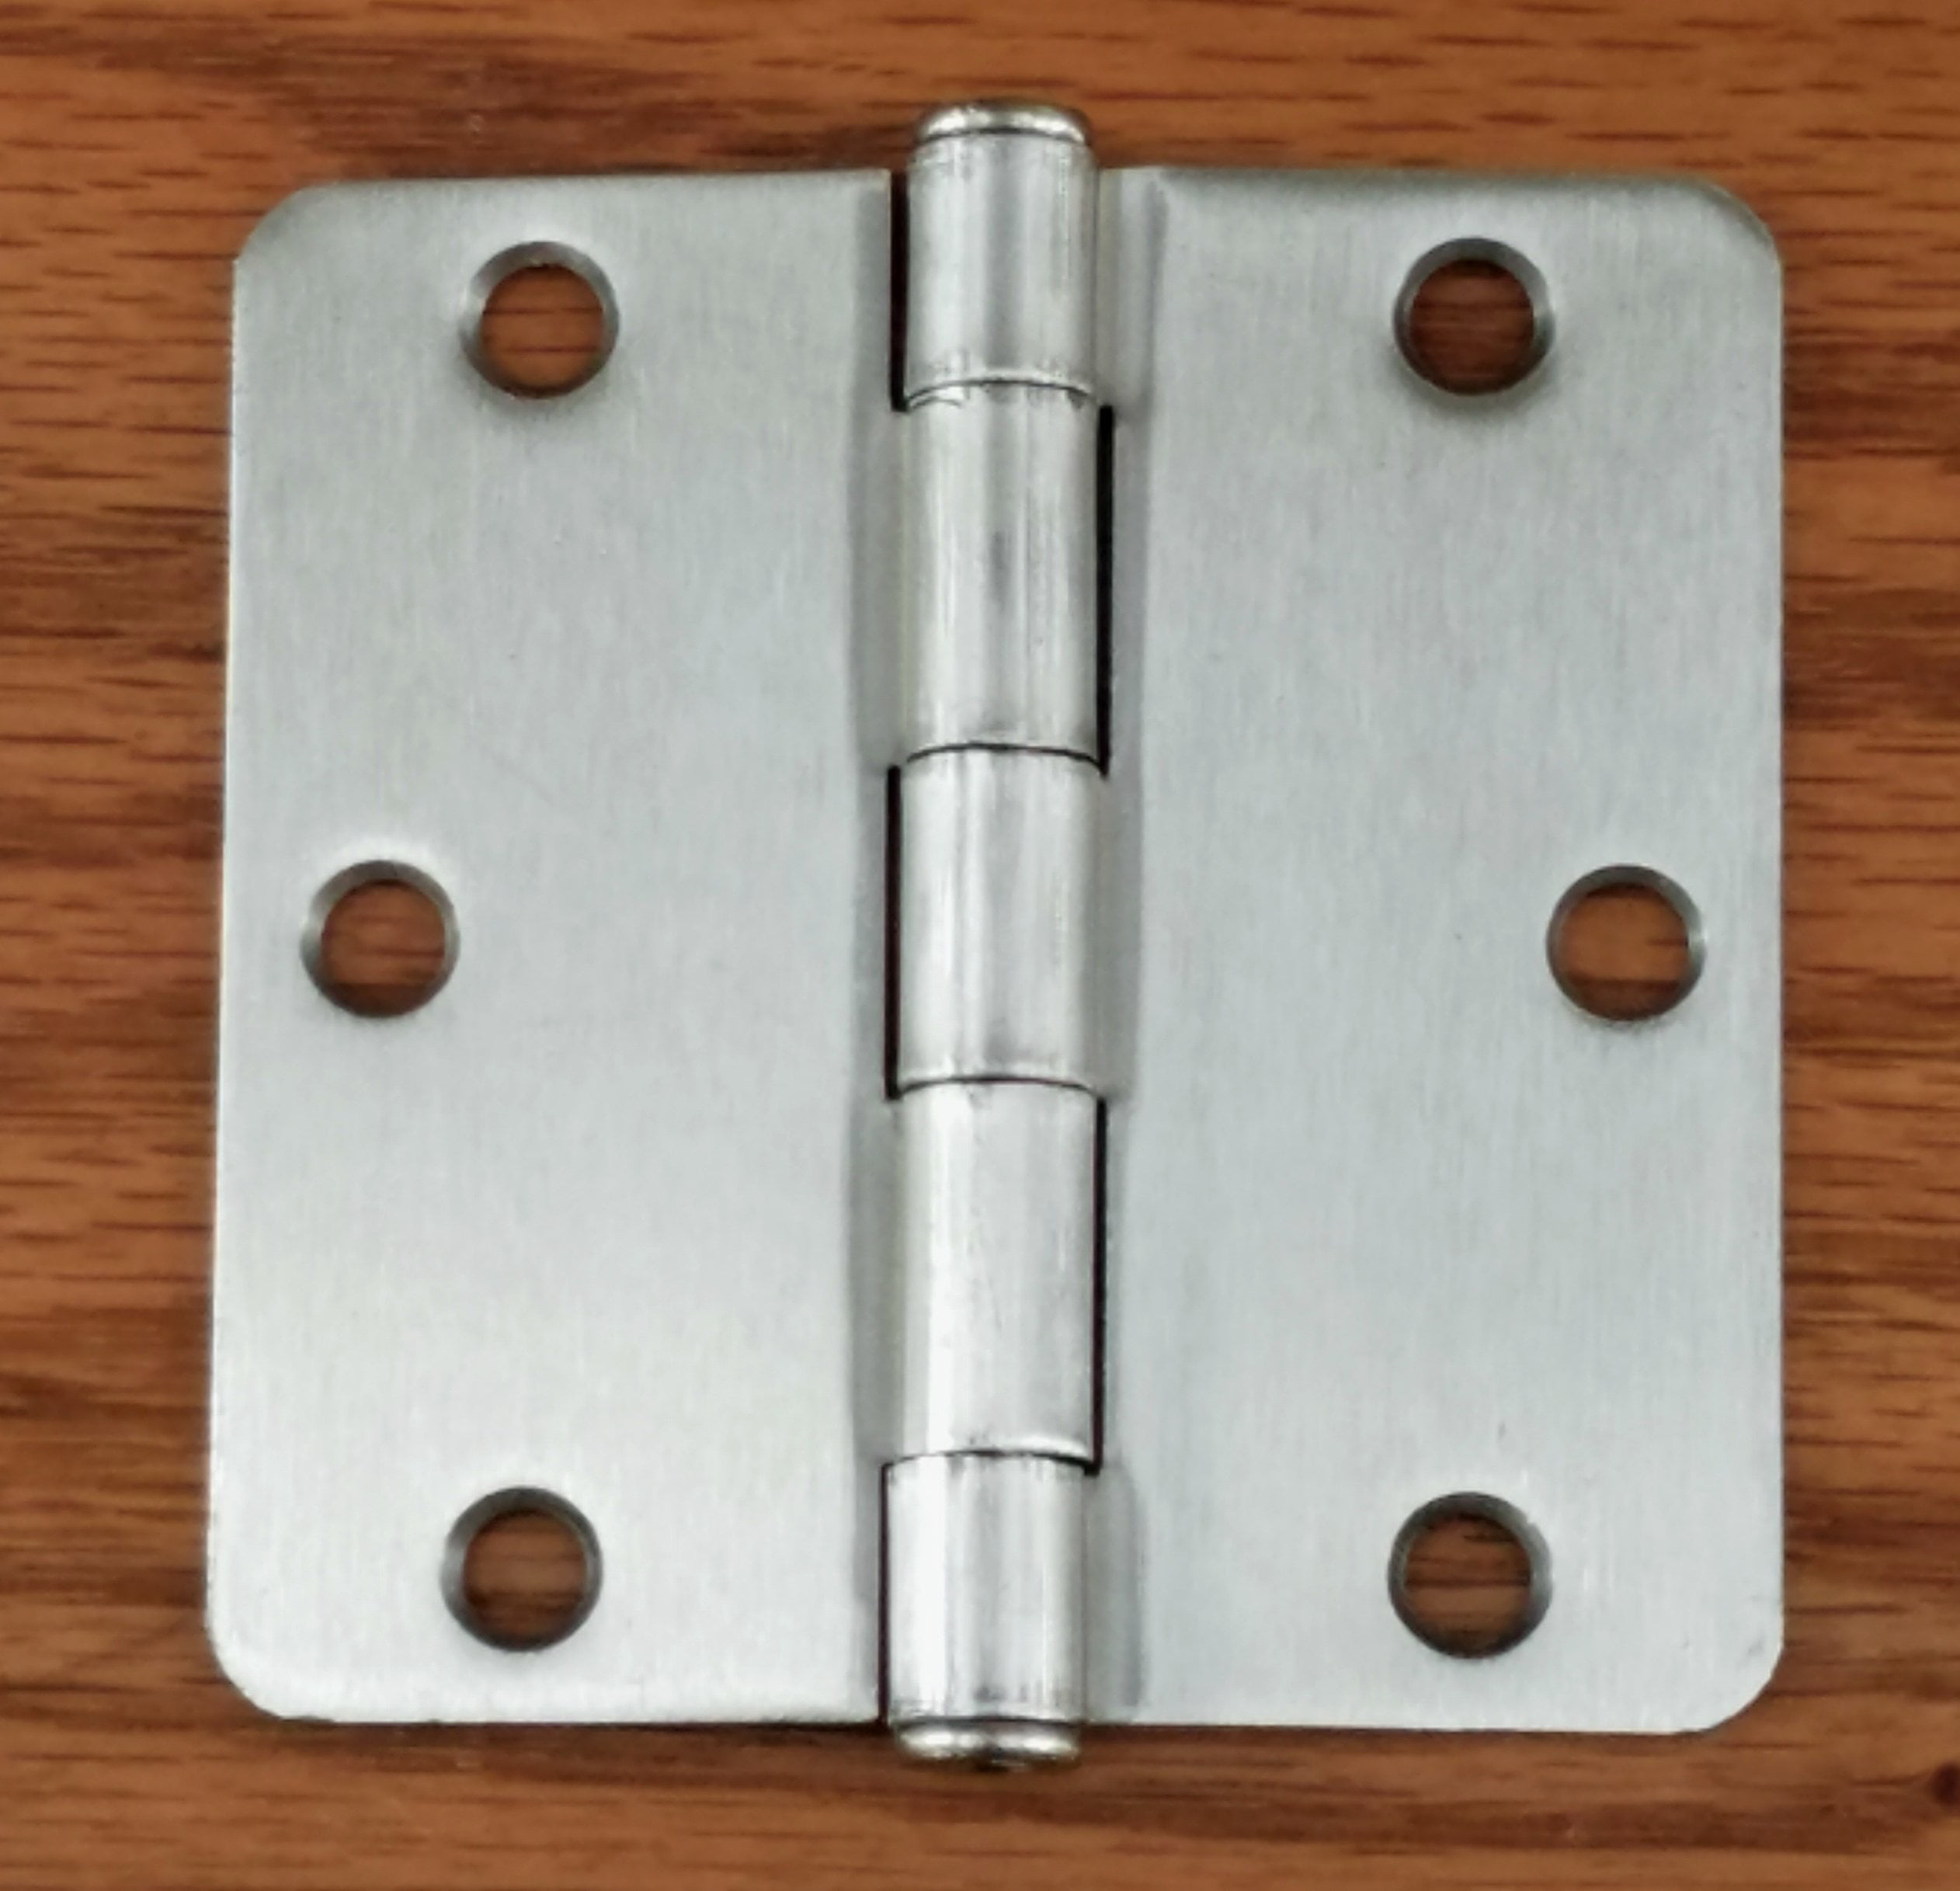 Residential Door Hinges Plain Bearing Satin Nickel Butt Hinges 3.5" Inches with 1/4